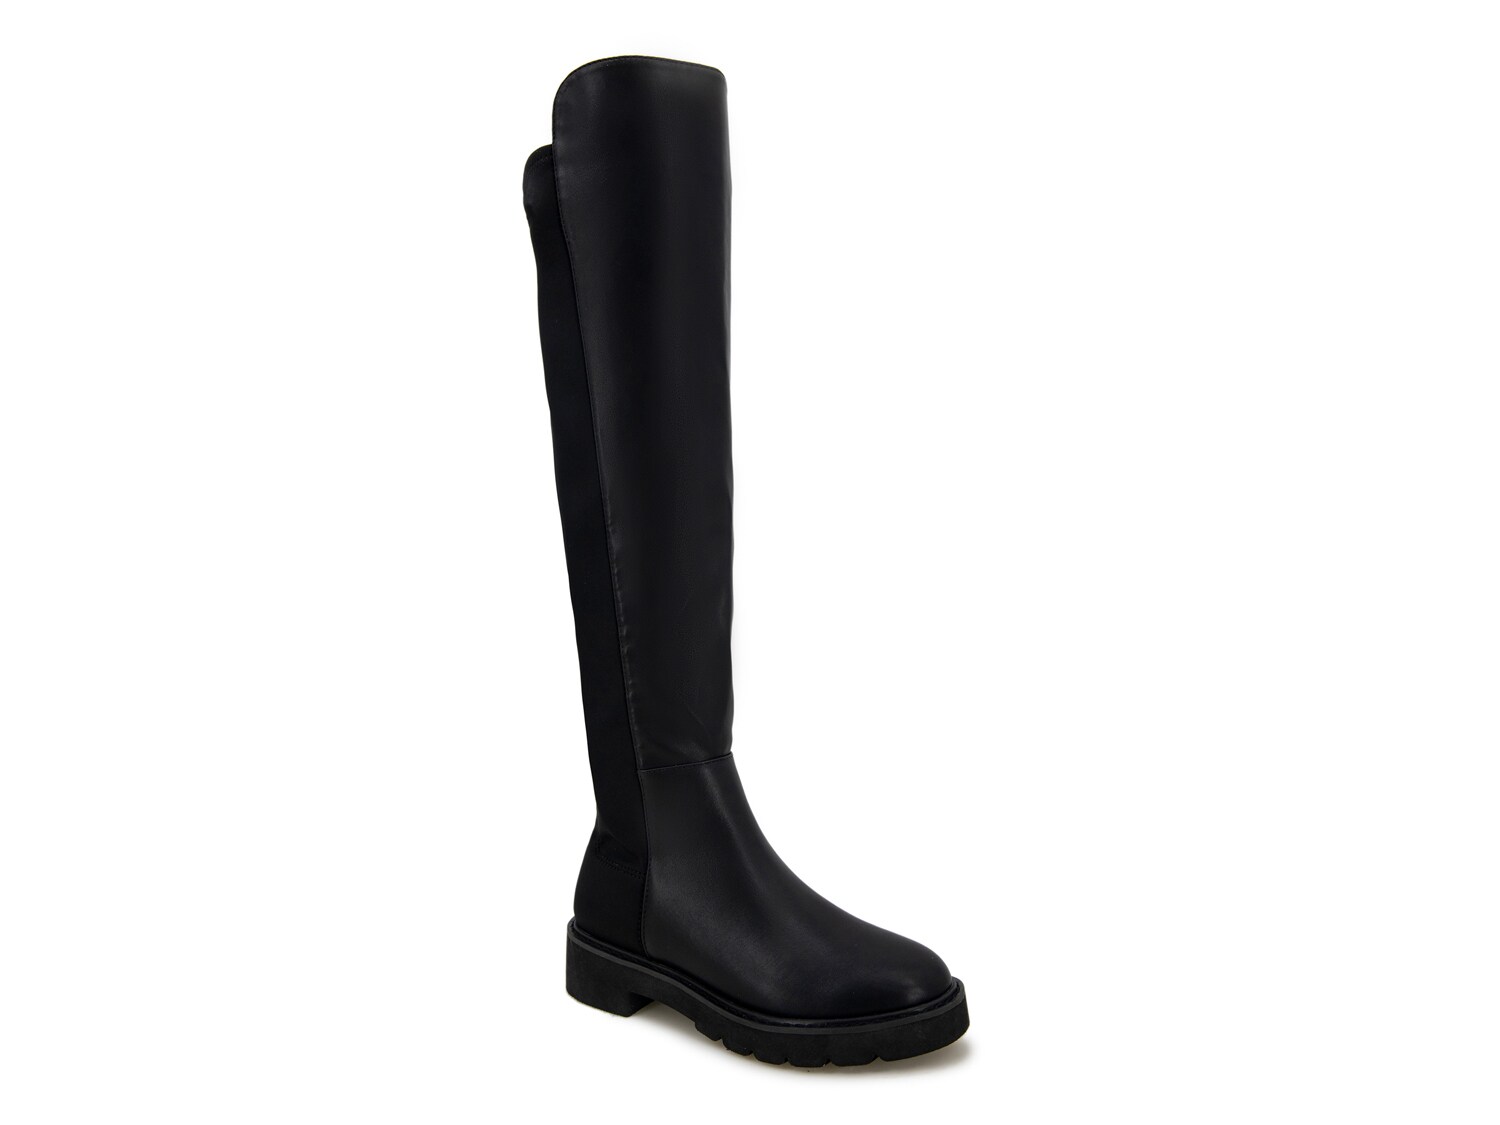 Kensie Welles Over-the-Knee Boot - Free Shipping | DSW